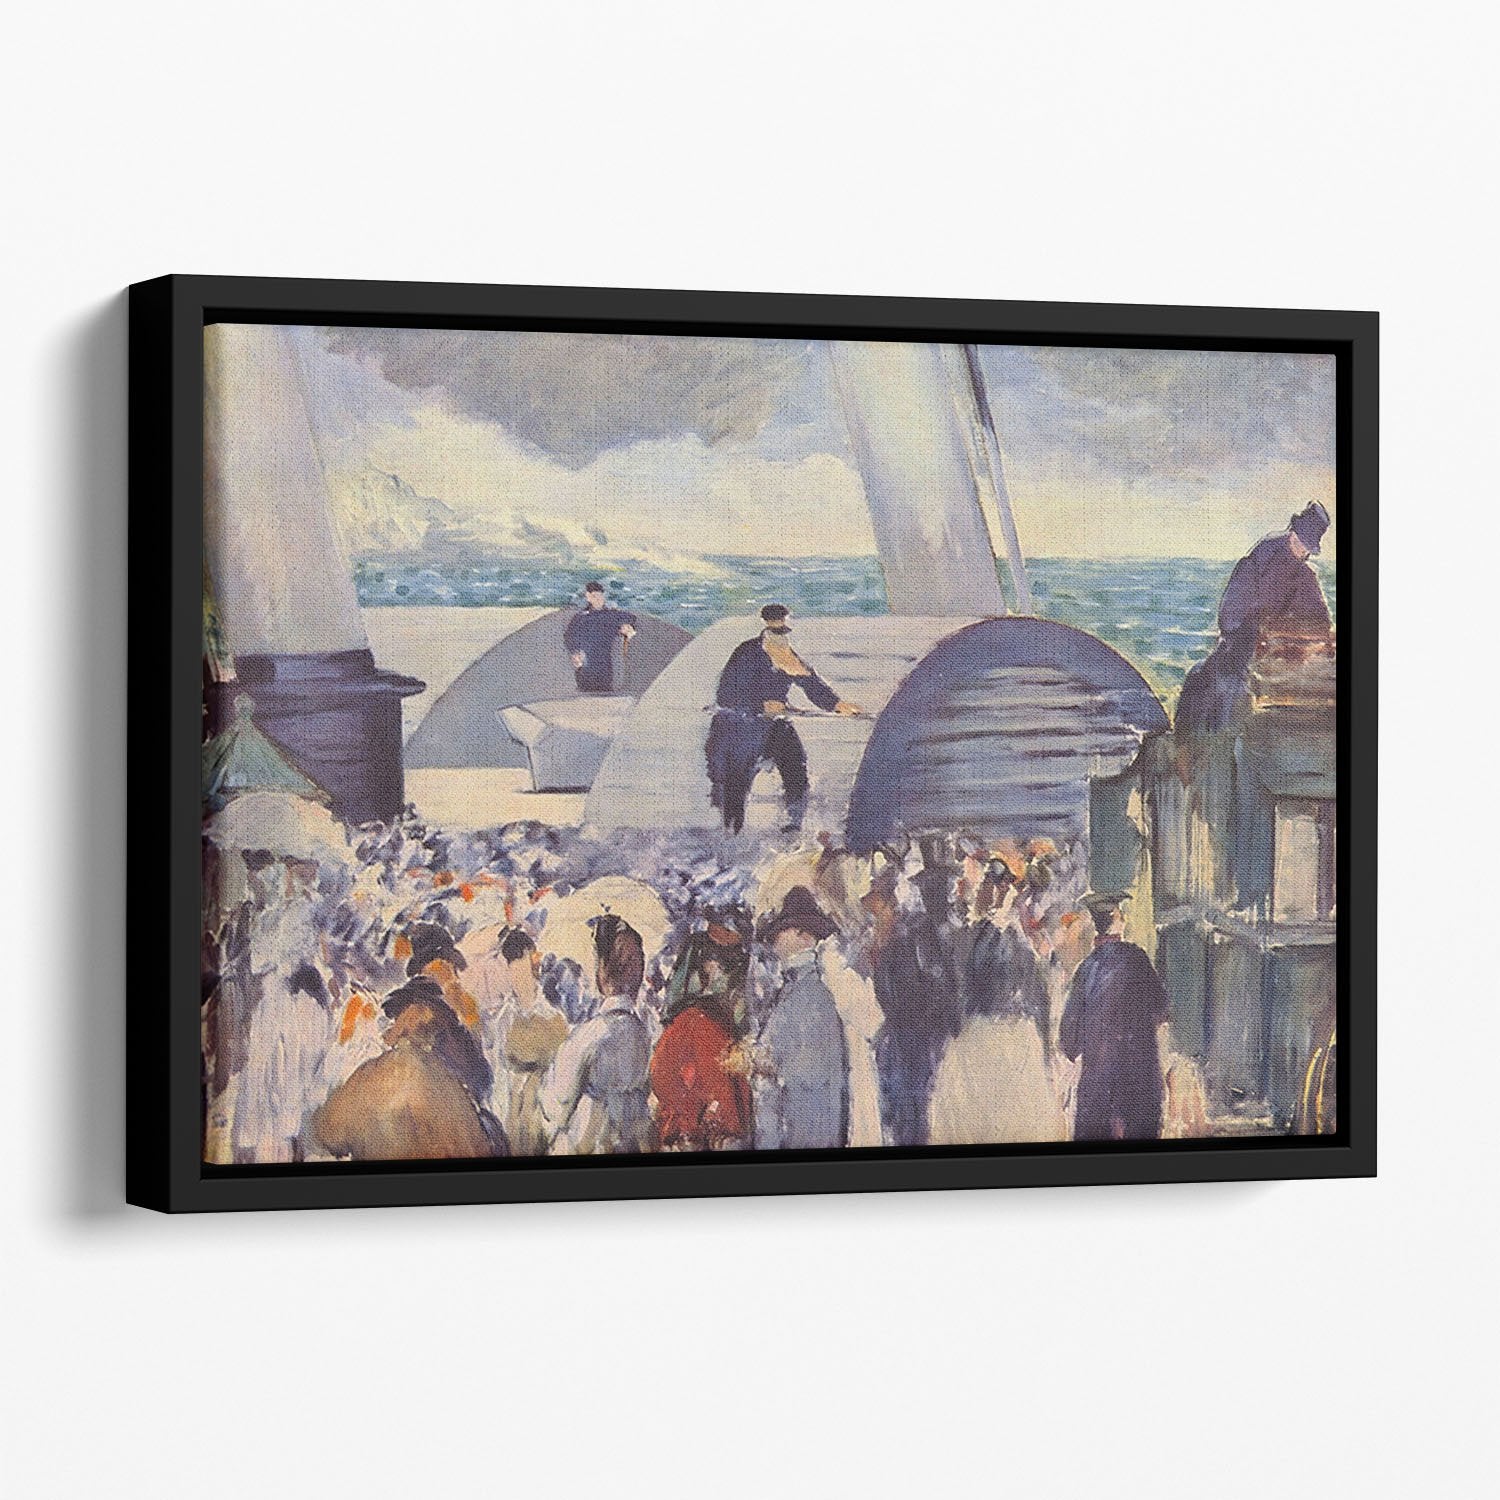 Embarkation of the Folkestone by Manet Floating Framed Canvas